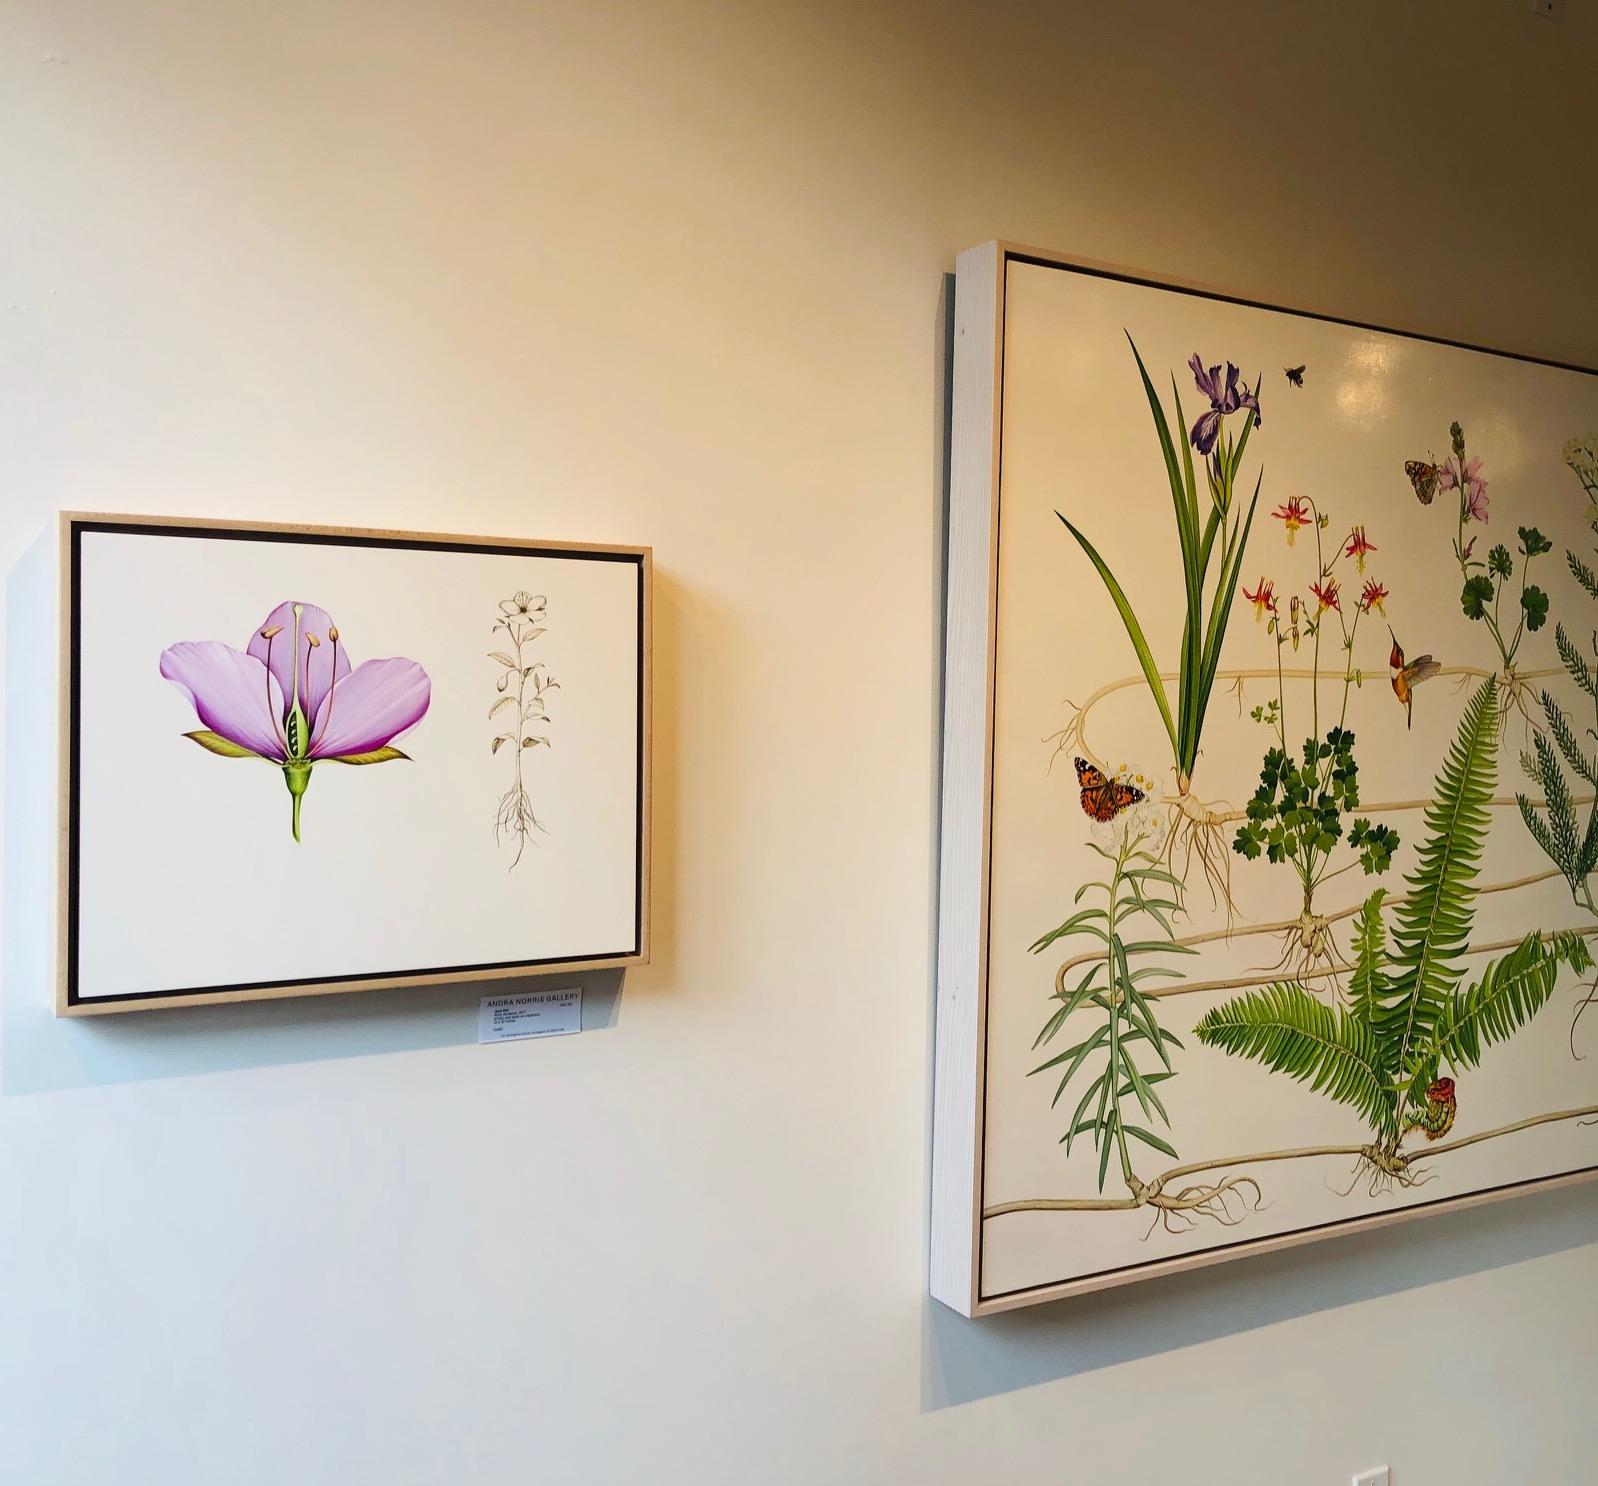 One of the nation’s most in-demand conservation/preservation artists, Jane Kim—who takes cues from the great tradition of science illustration—inspires people to love and protect Earth, one work of art at a time. Her contemporary series of mixed